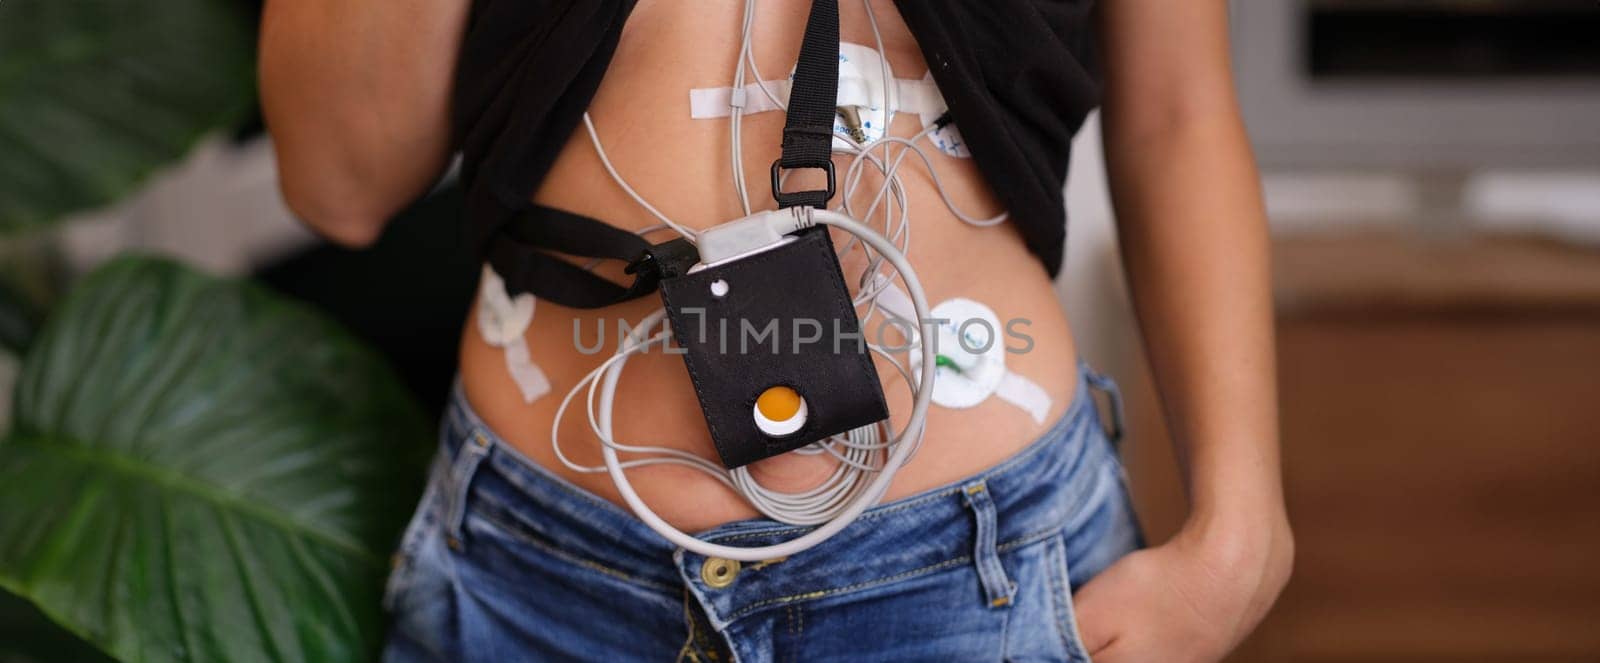 24-hour ECG monitoring and Holter monitoring on a woman body by kuprevich